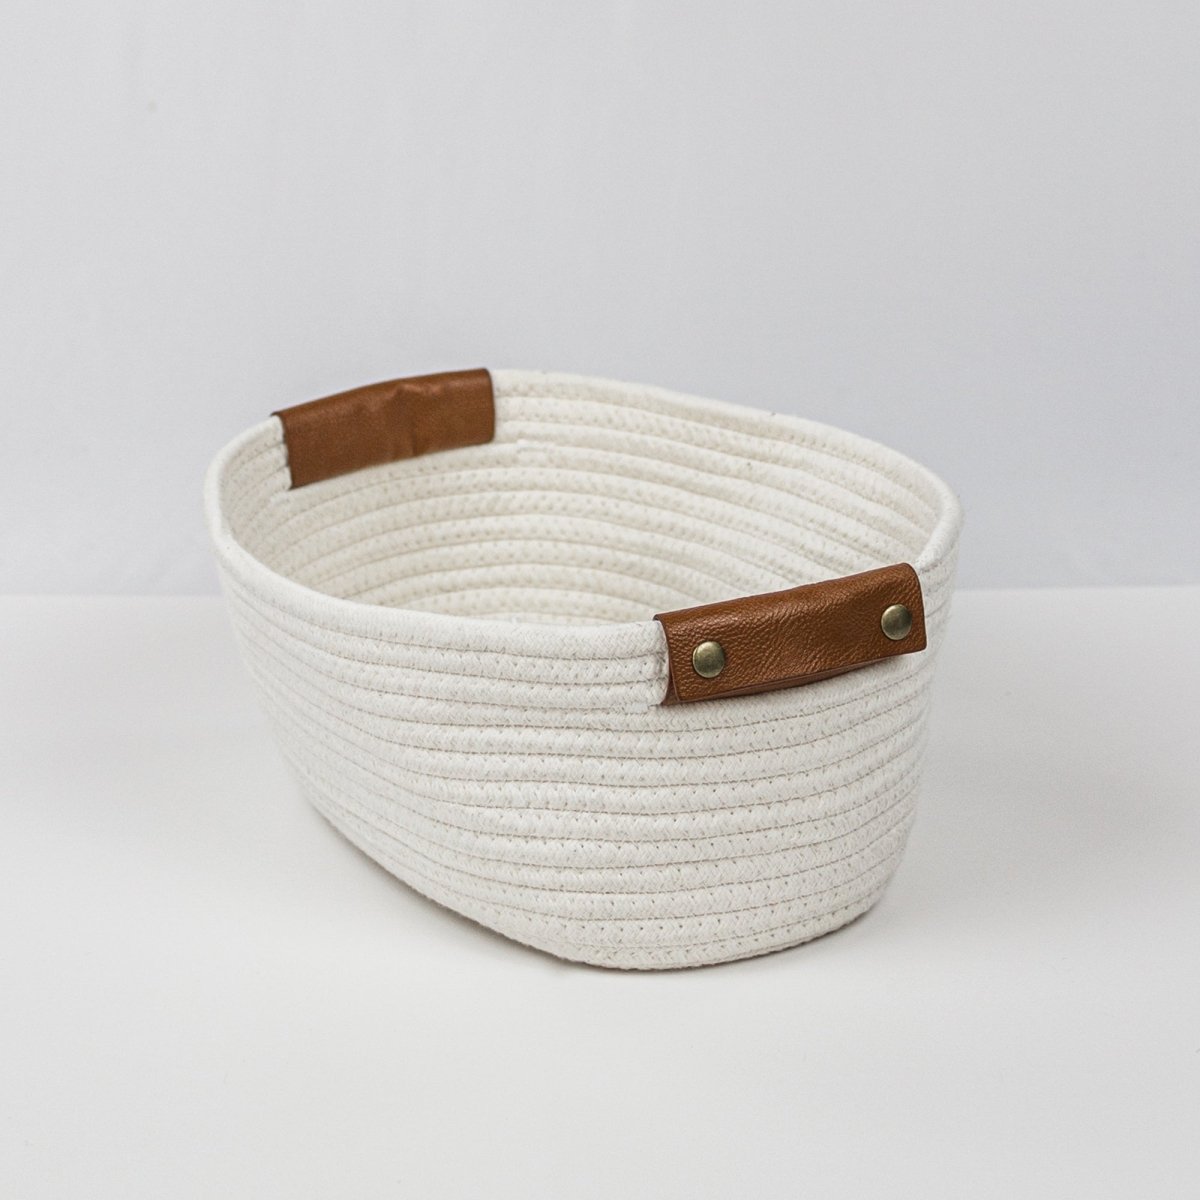 Porto Boutique 931 - Storage cotton basket with leather handles - lily & onyx